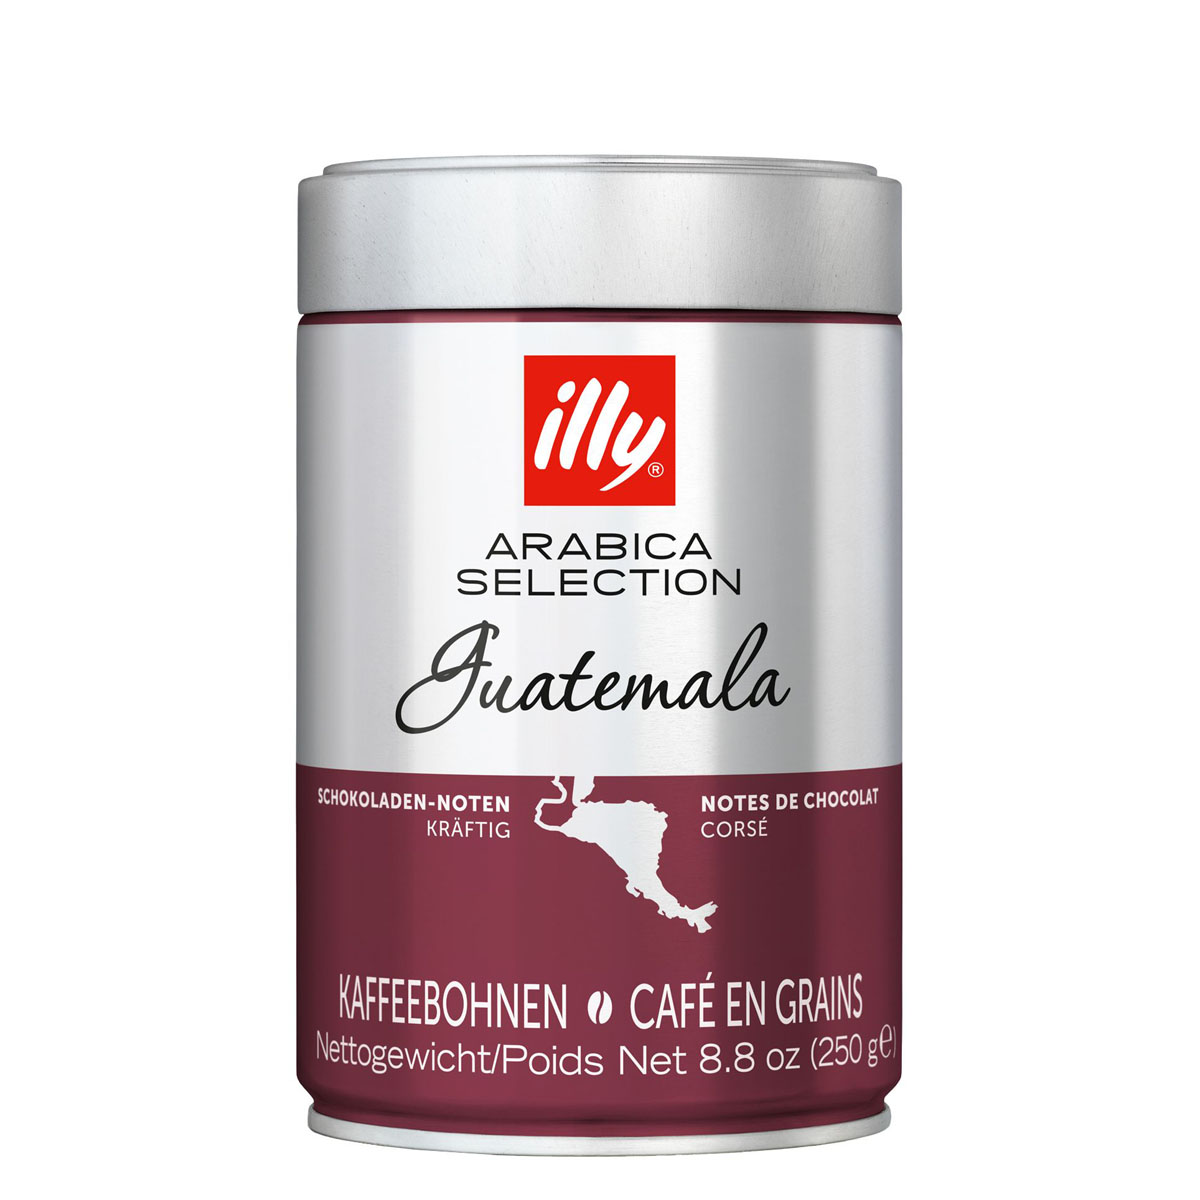 illy monoarabica guatemala 250g Cafea Doncafe 250G Pret